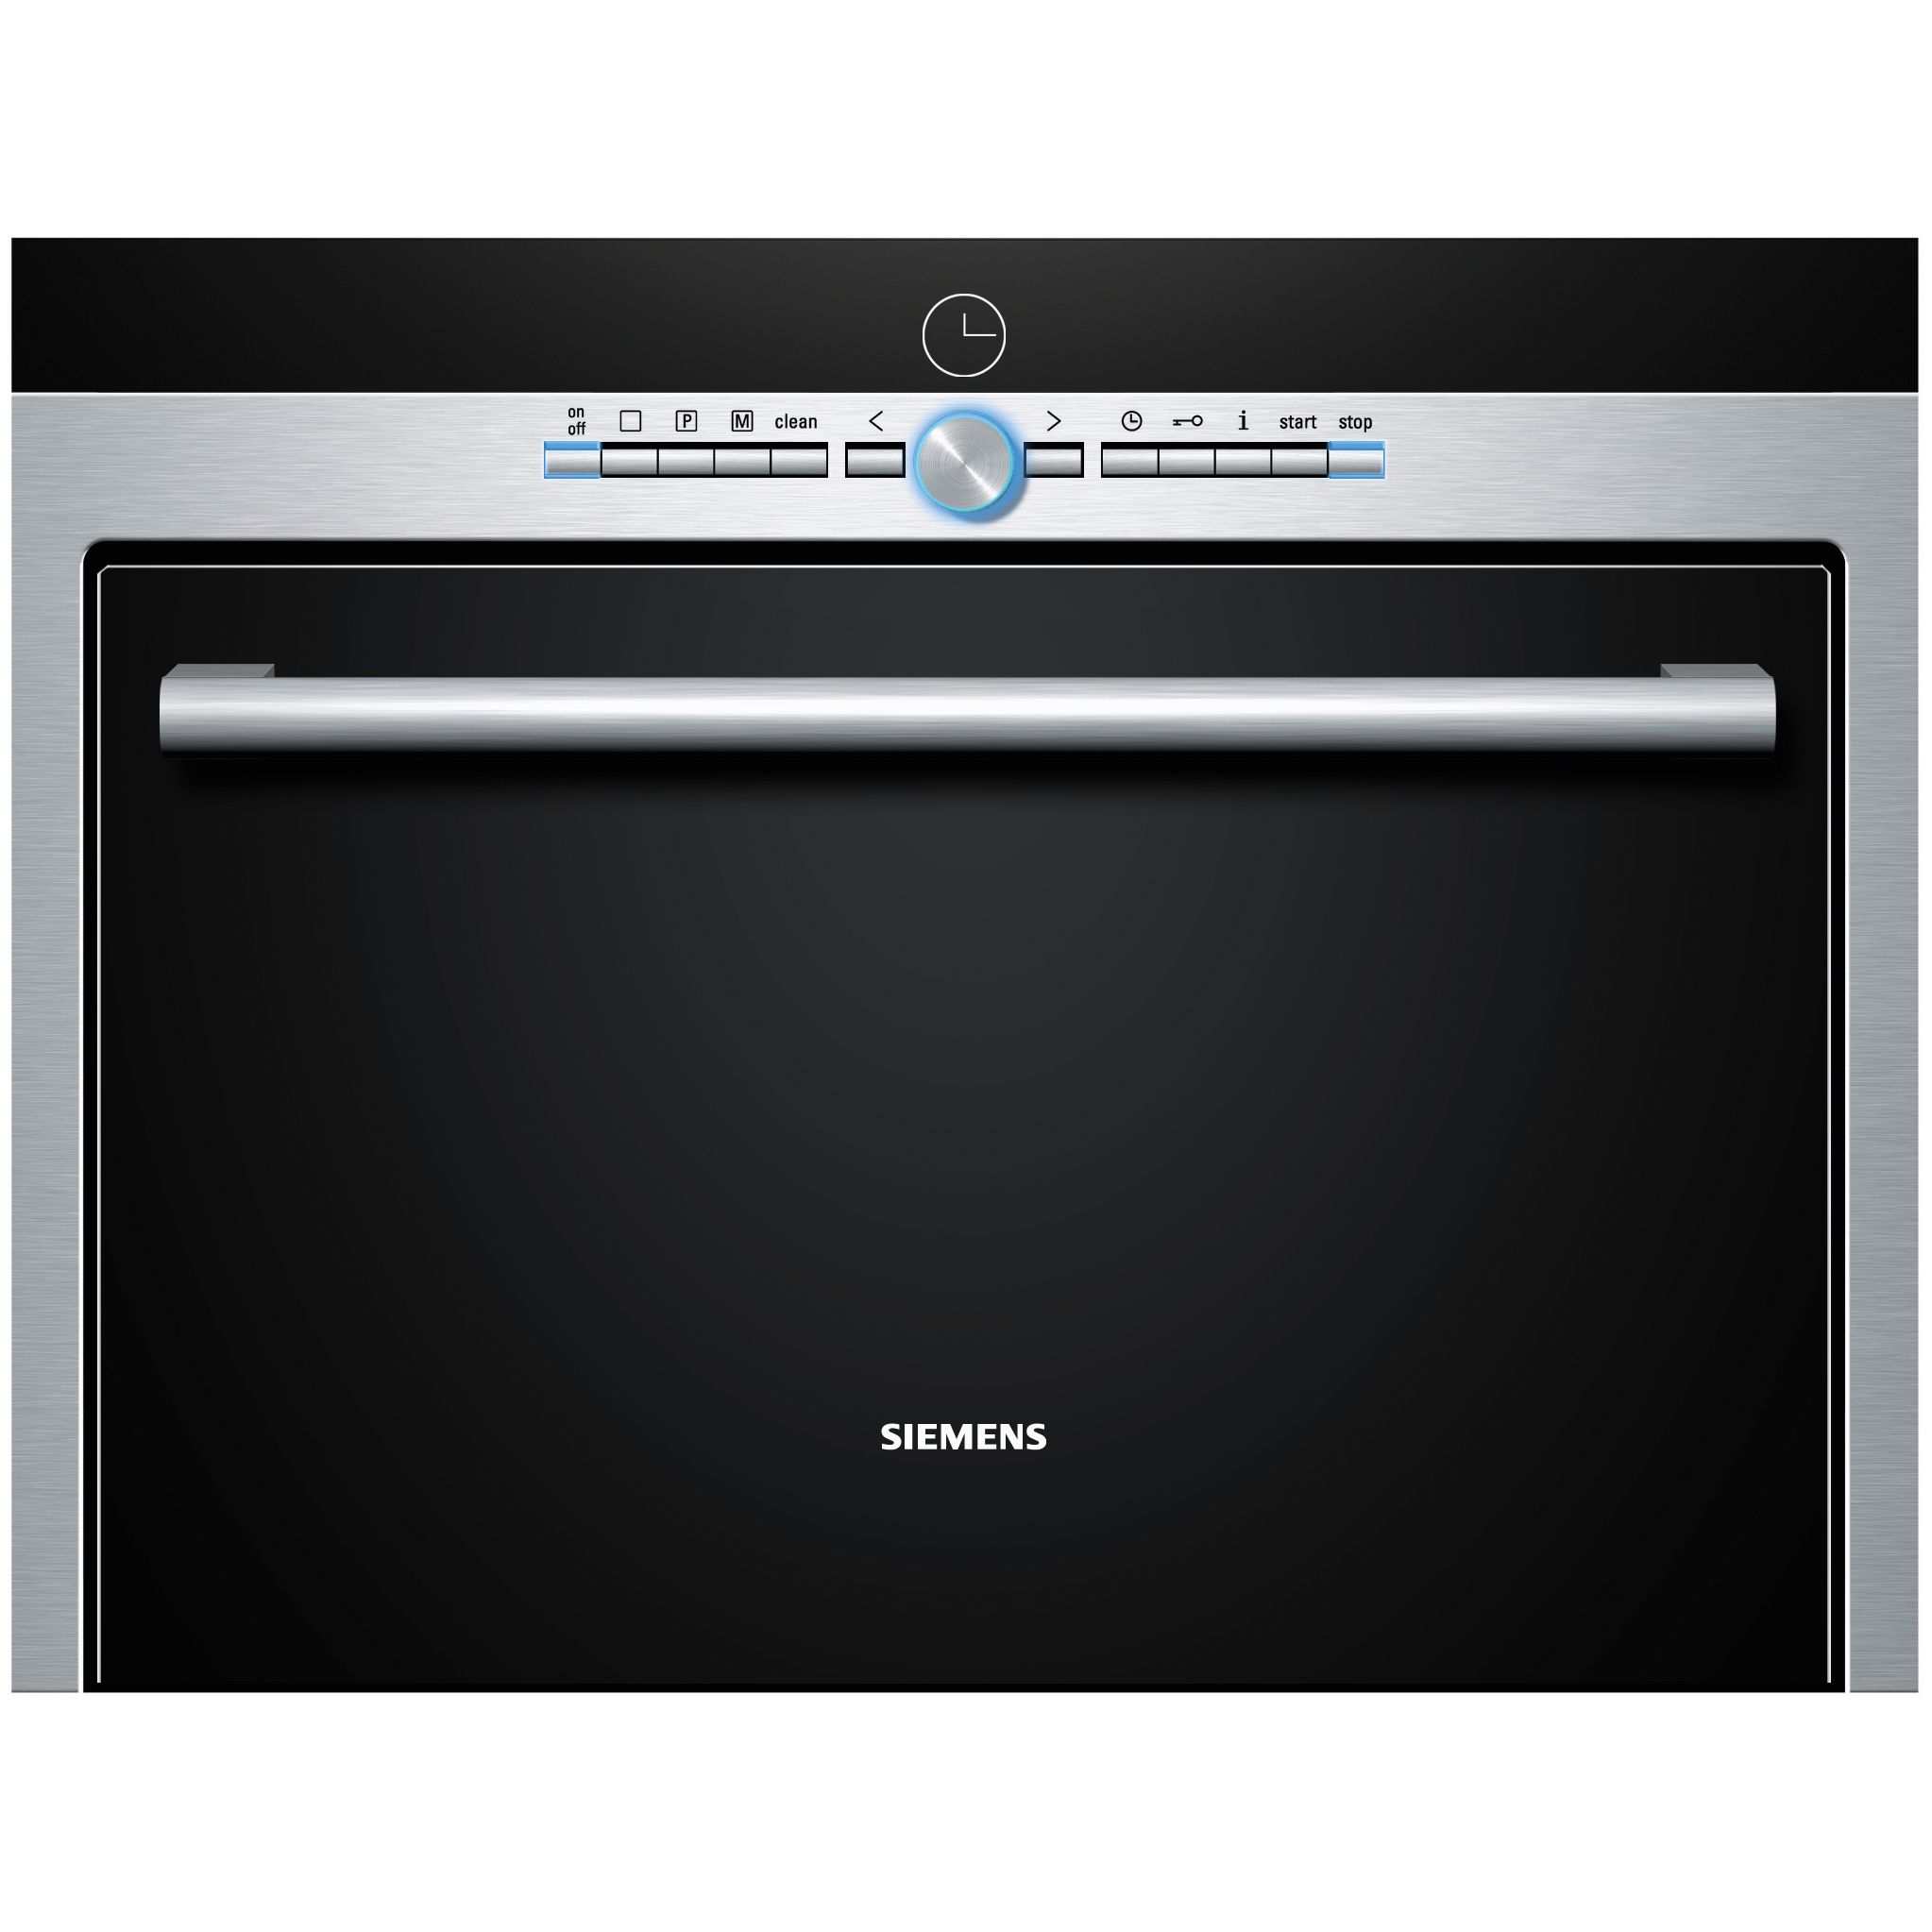 Siemens HB36D572B Compact Steam Oven, Stainless Steel at John Lewis